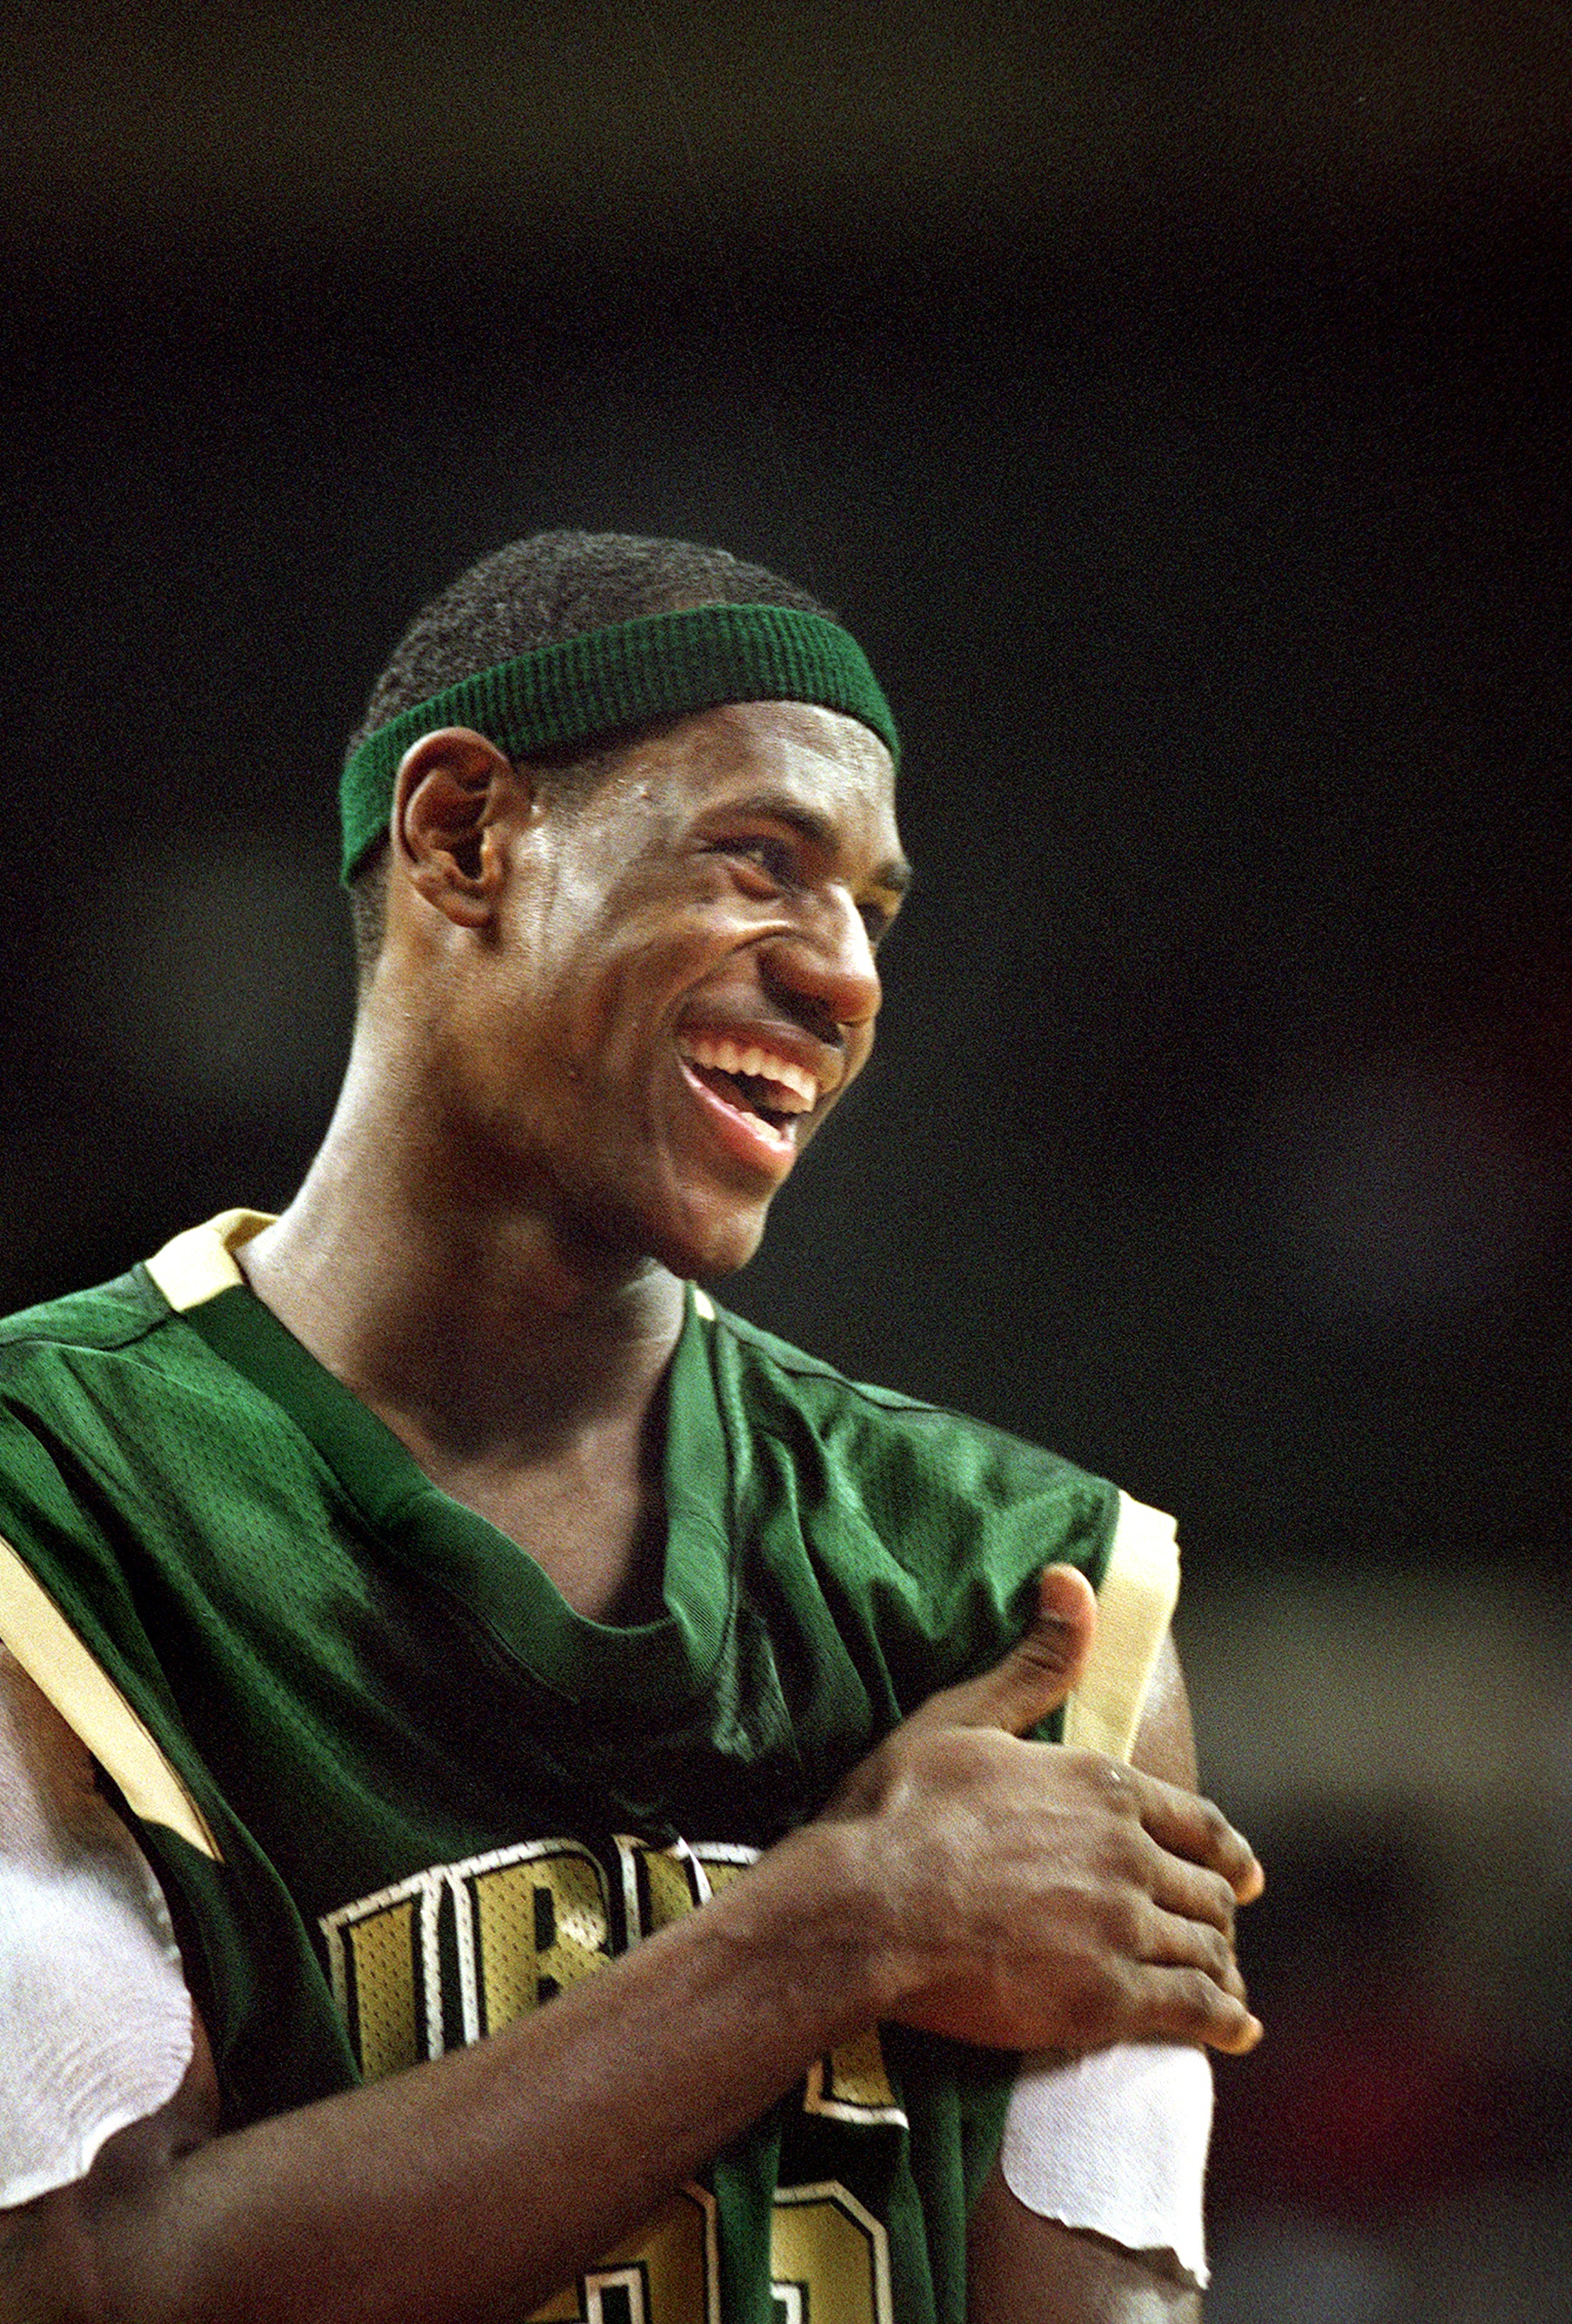 LeBron James during a timeout in a game against Brush at the Cleveland State University Convocation Center, January 13, 2002   (Chris Stephens/The Plain Dealer)   